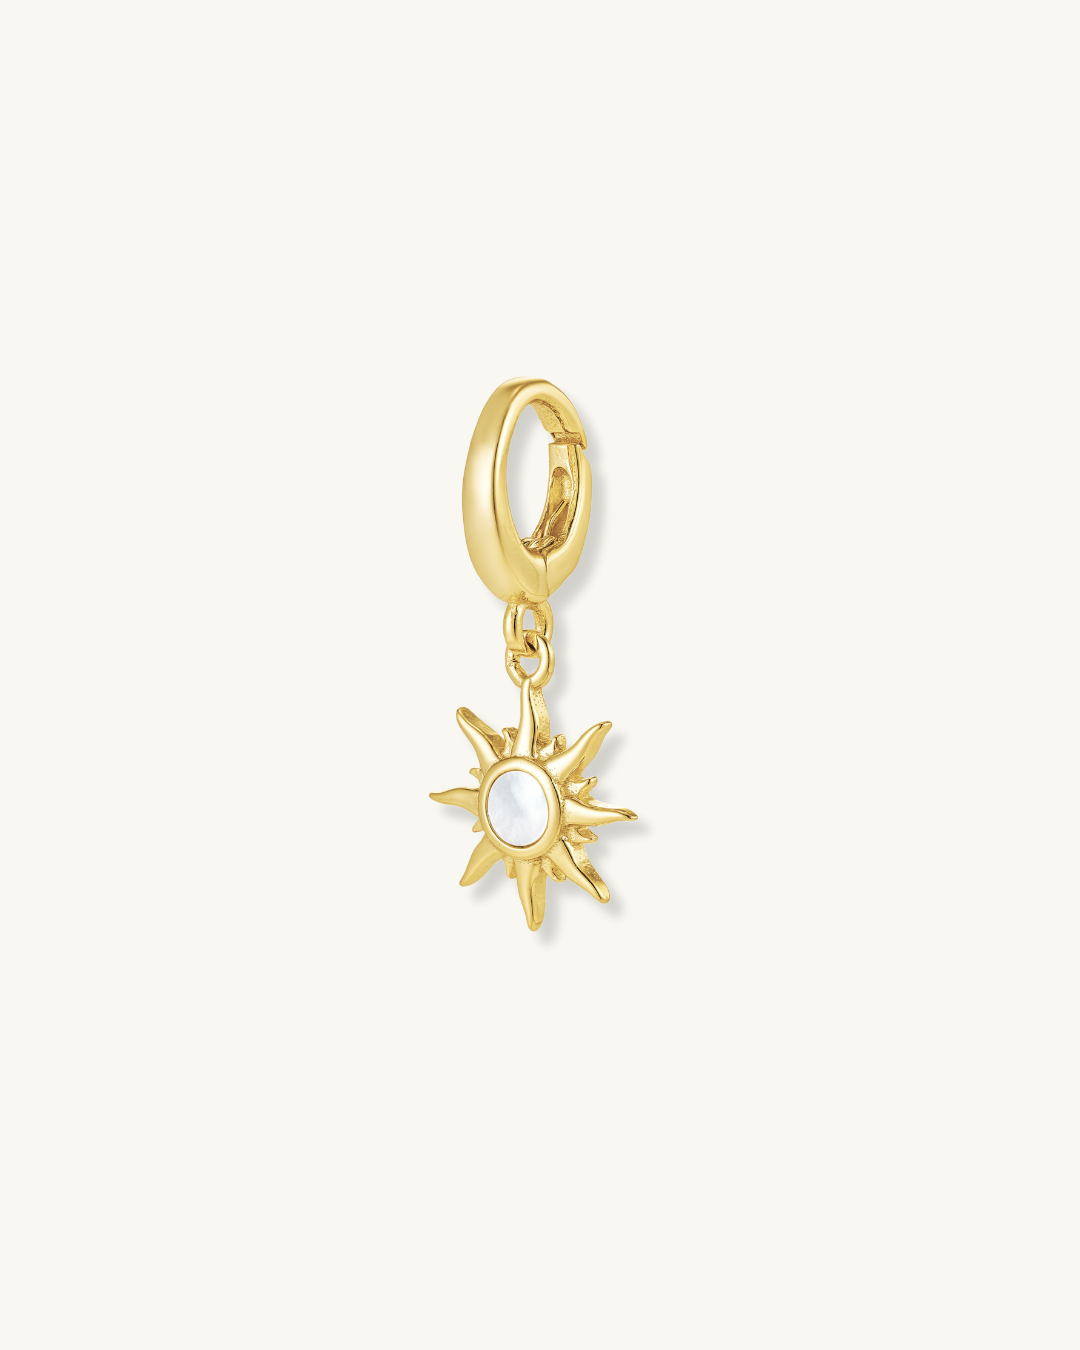 MOTHER OF PEARL SUN CHARM